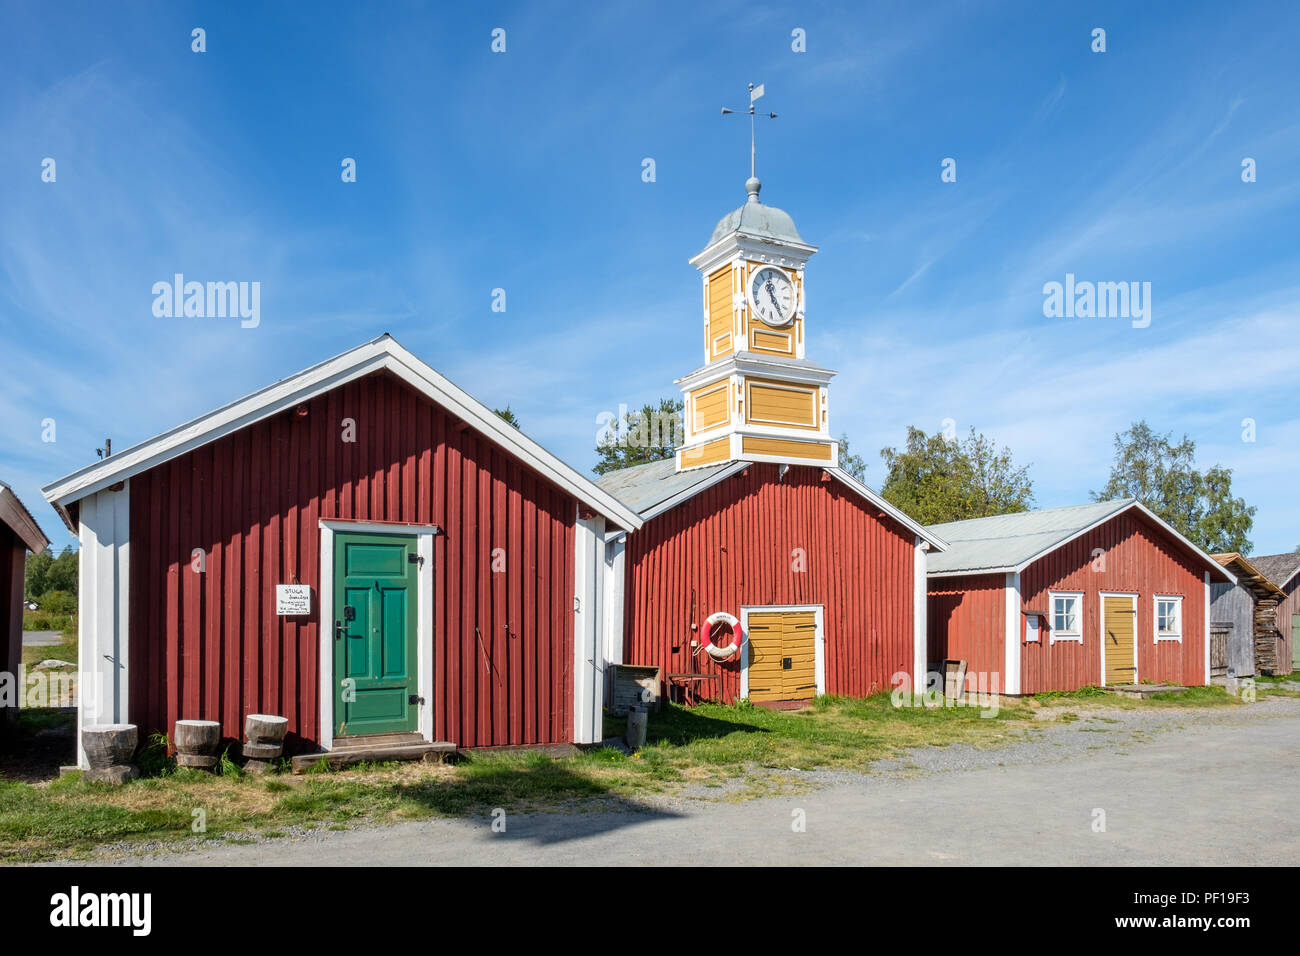 Fishermans cottages on the Swedish side of Torne river. Kukkola rapids has been a fishing site since medieval times. Stock Photo